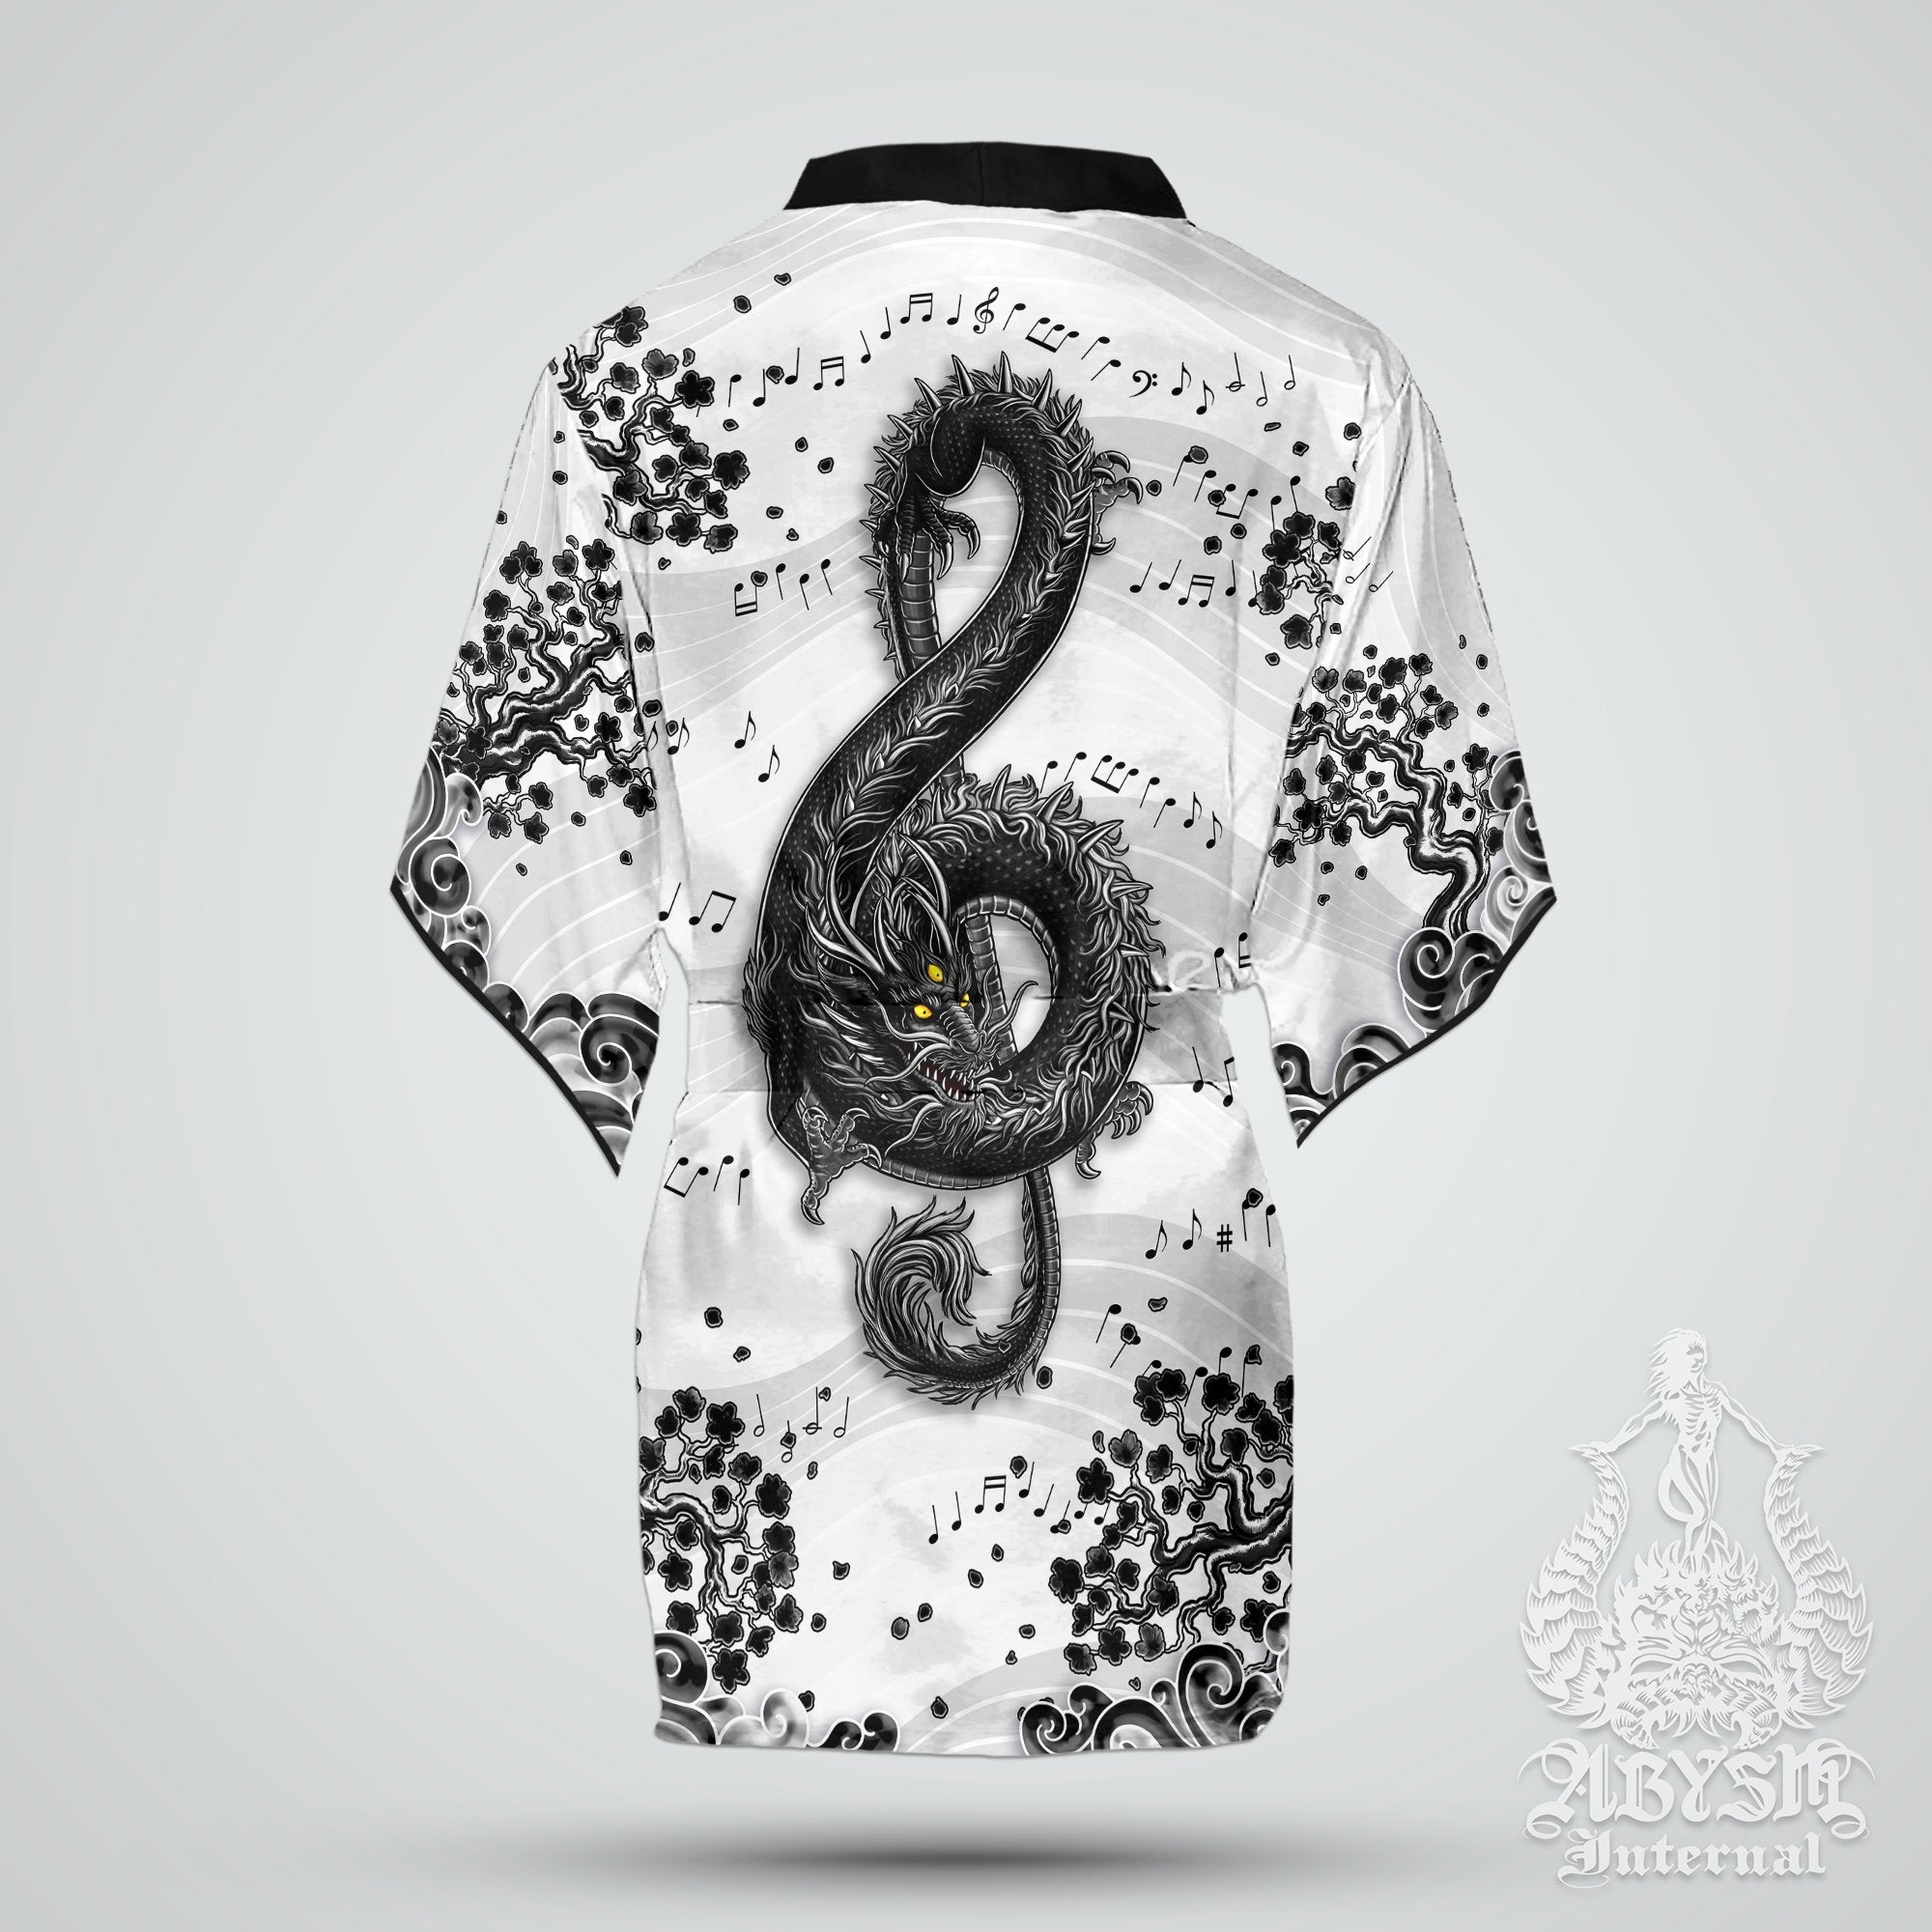 Music Cover Up, Beach Outfit, Party Kimono, Summer Festival Robe, Gothic Indie and Alternative Clothing, Unisex - Dragon, White Goth - Abysm Internal